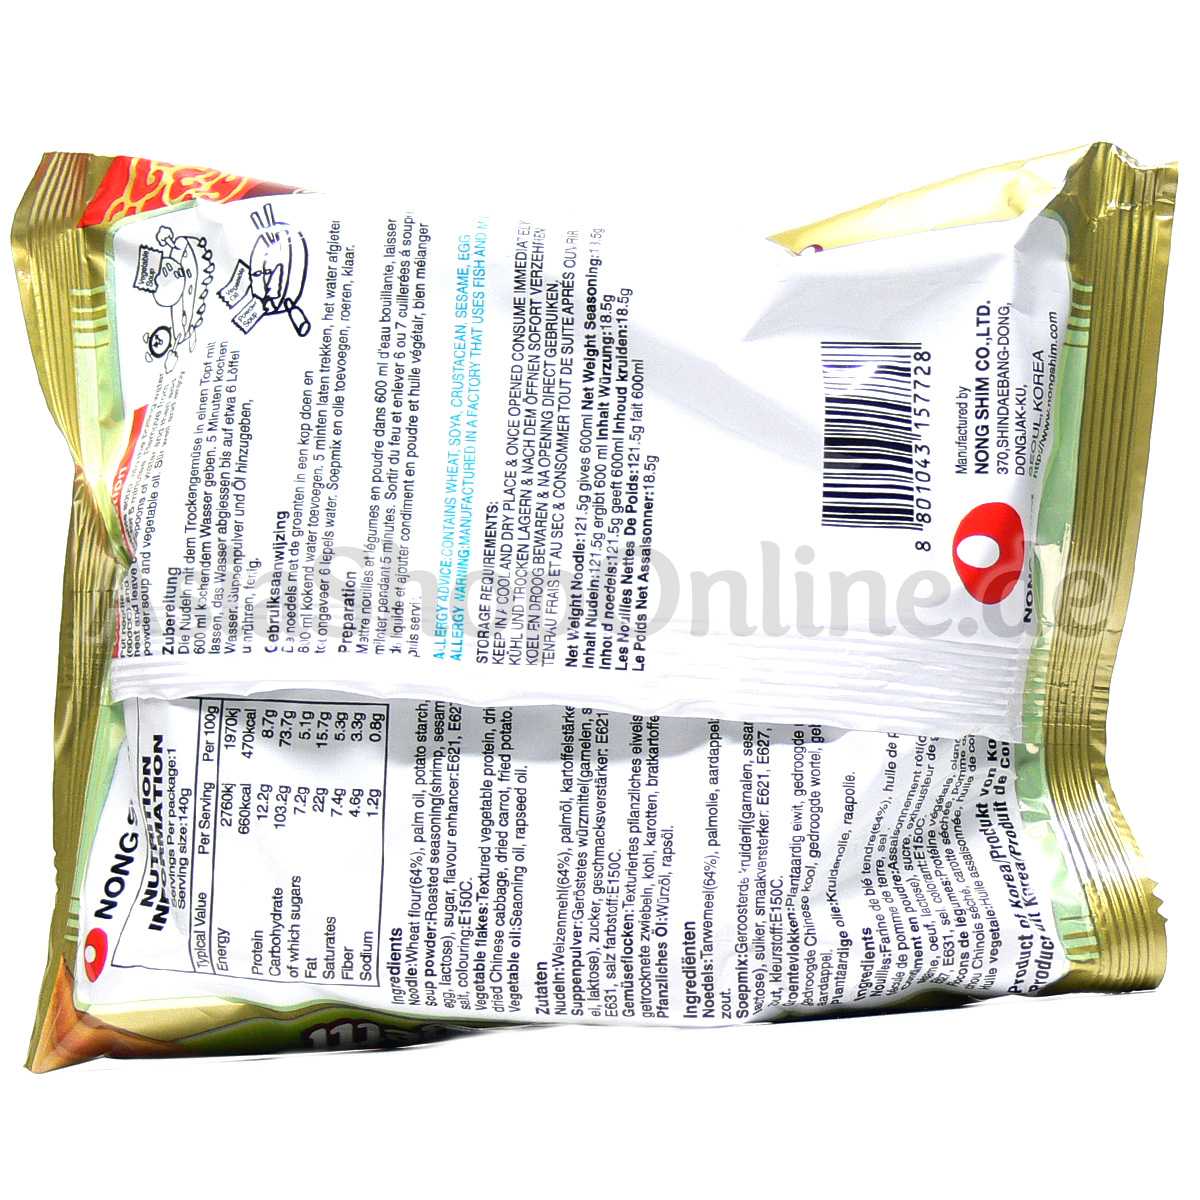 Chapagetti Instant Nudeln - Nong Shim - 140g